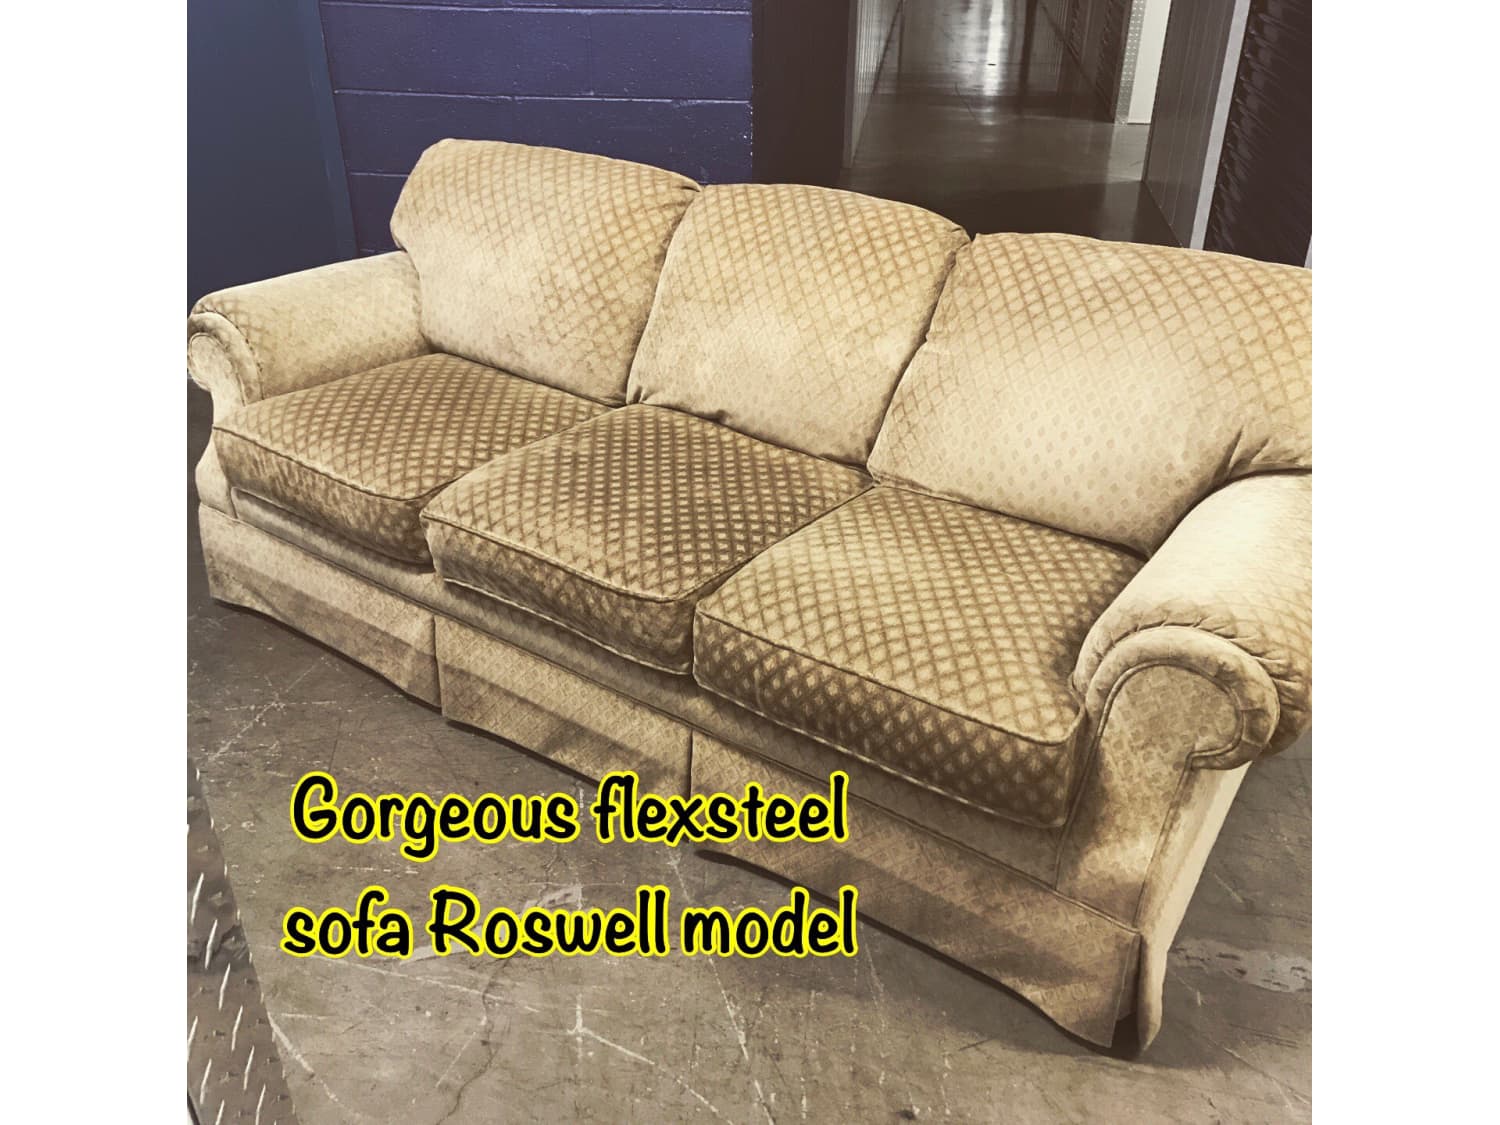 Opmuntring ventil køre Roswell sofa - Apartment Therapy's Bazaar.